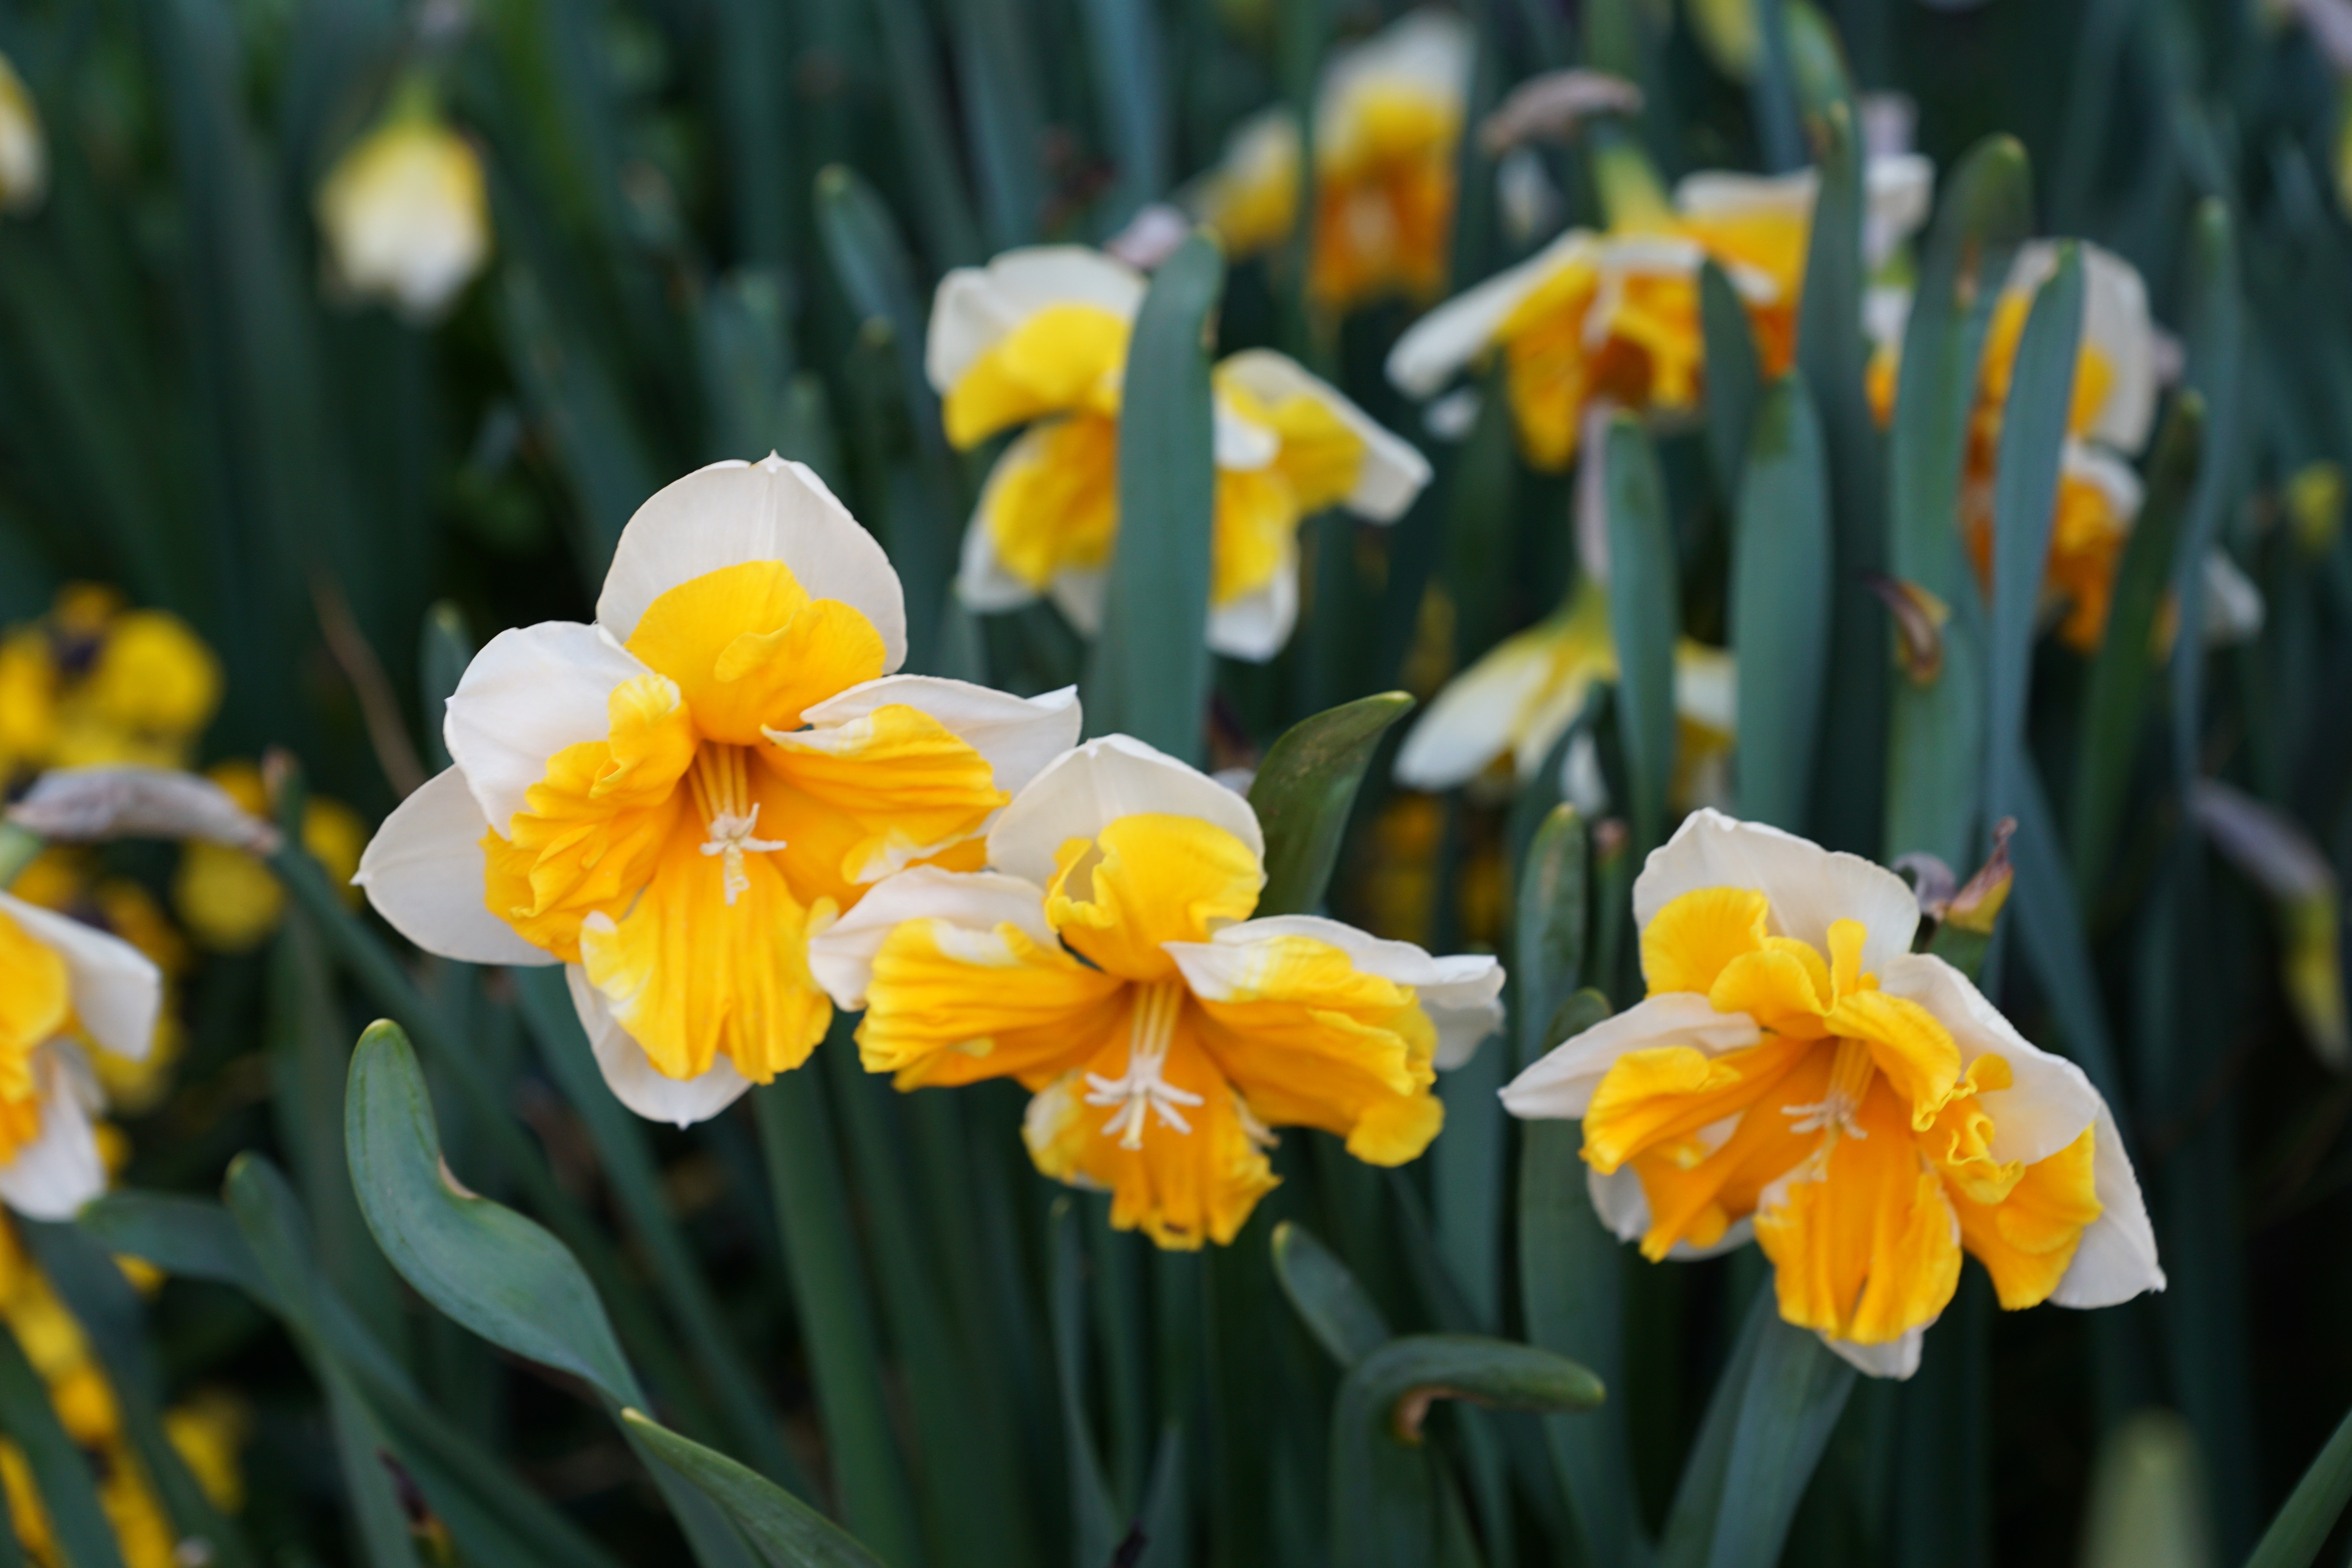 3 yellow and white petaled flowers